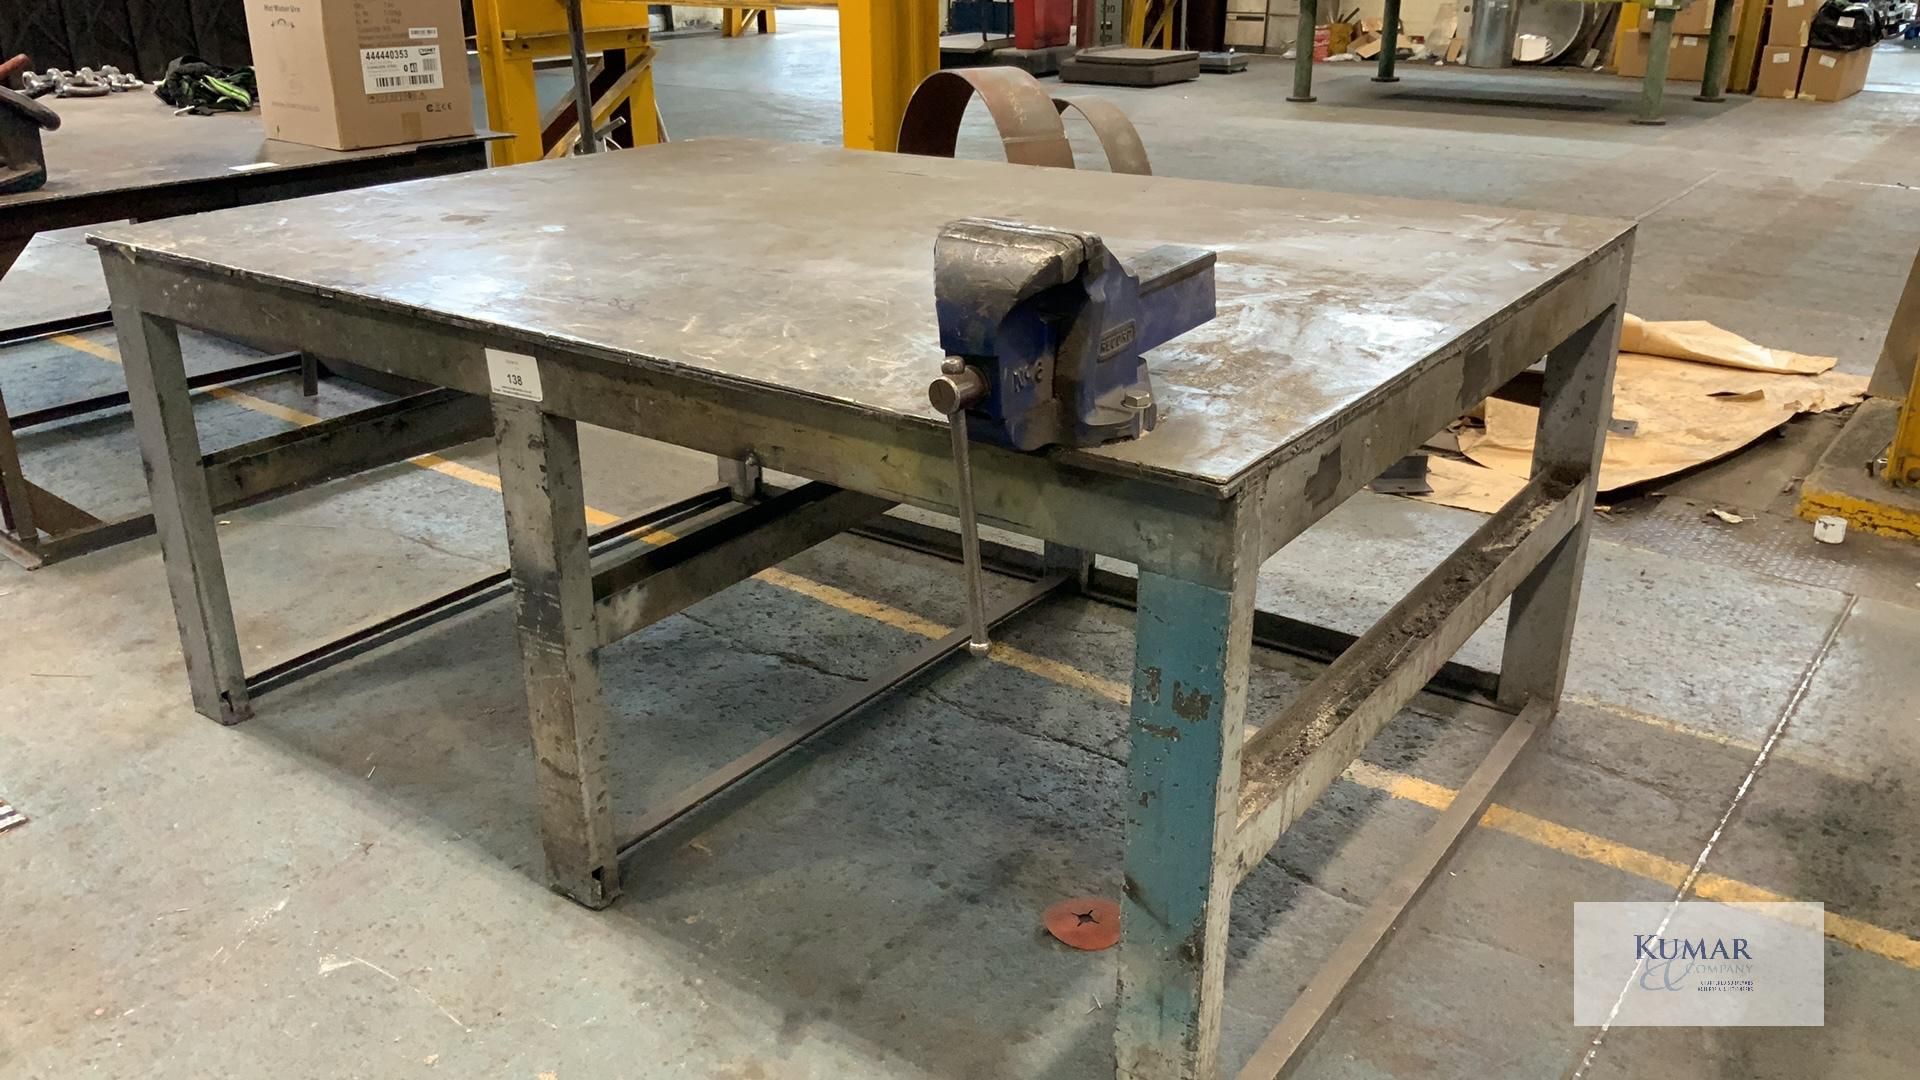 Welded Mild Steel Work Bench with Record No.Vice- Dimensions 214cm x 154cm x 92cm -Please Note